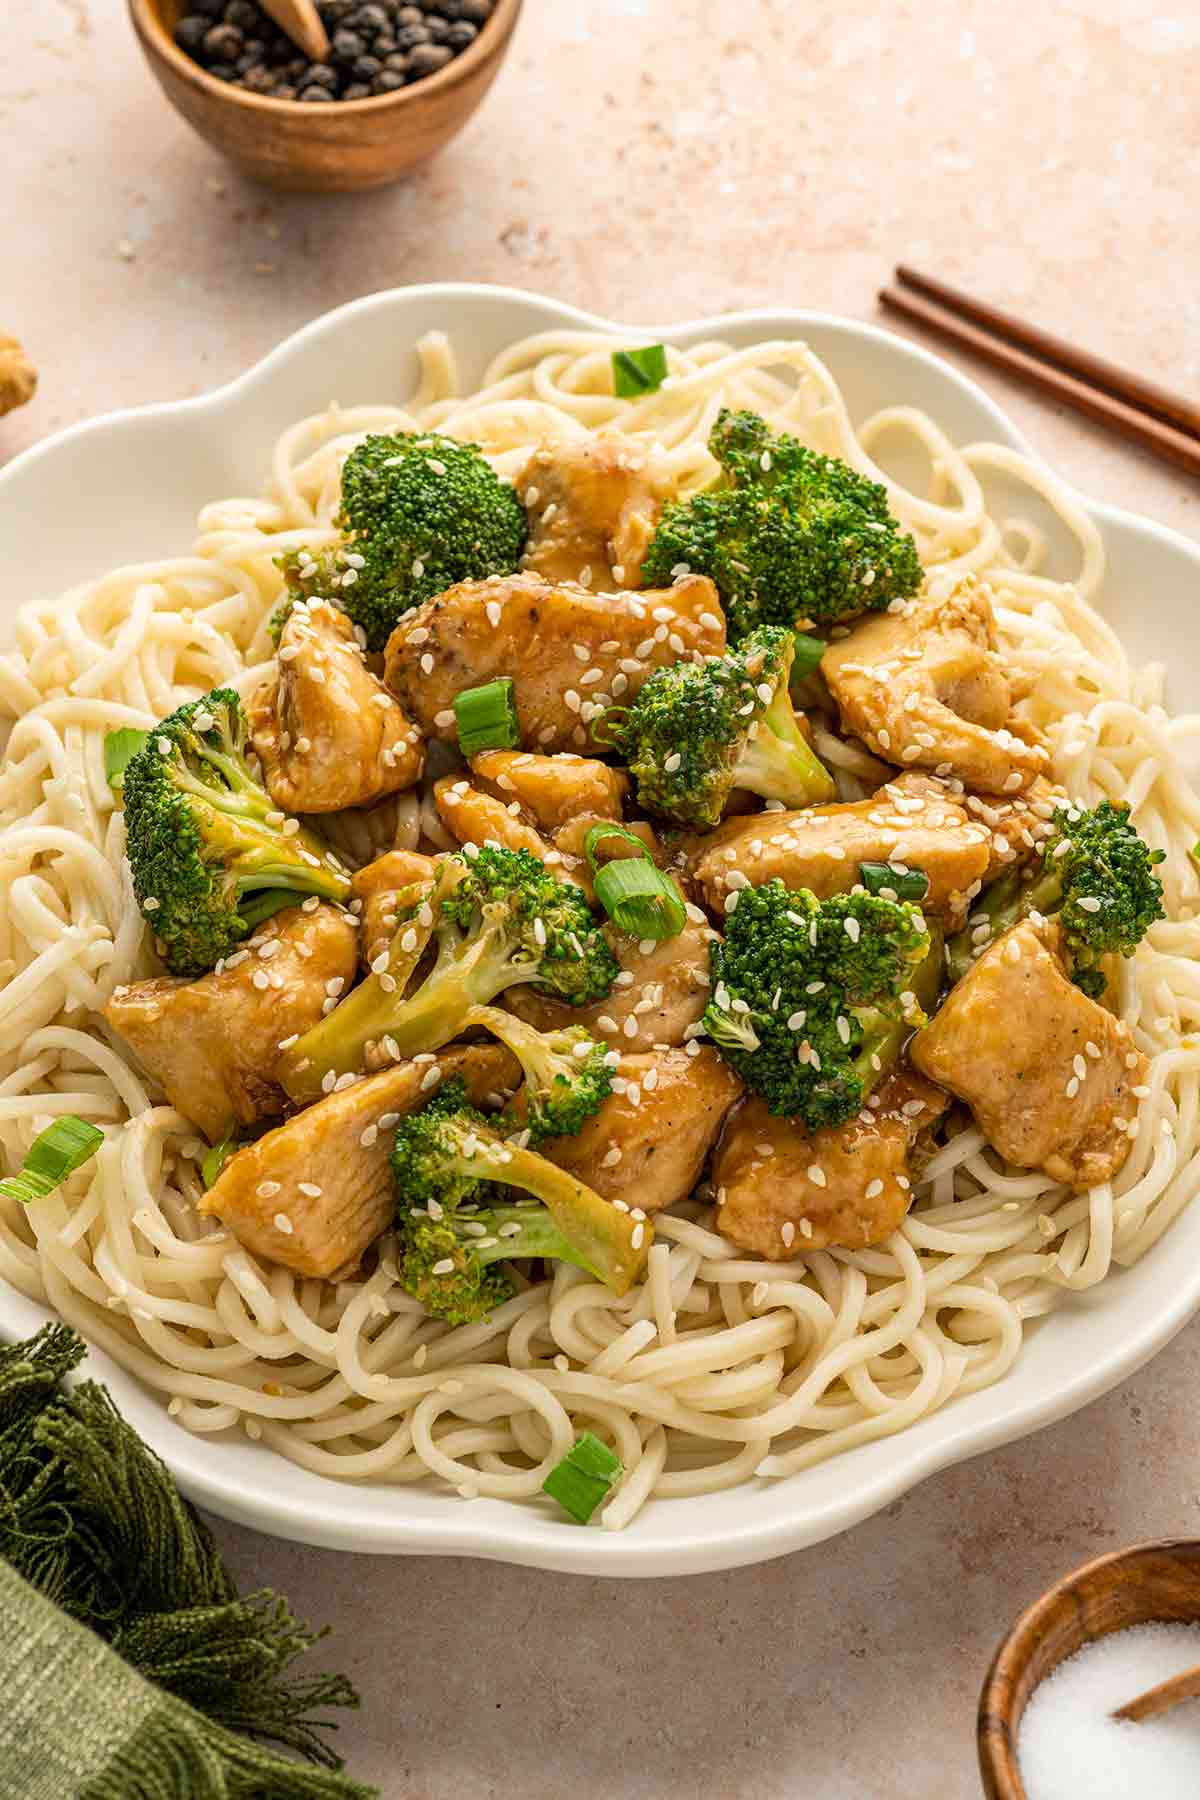 Chicken and Broccoli Stir Fry with Noodles